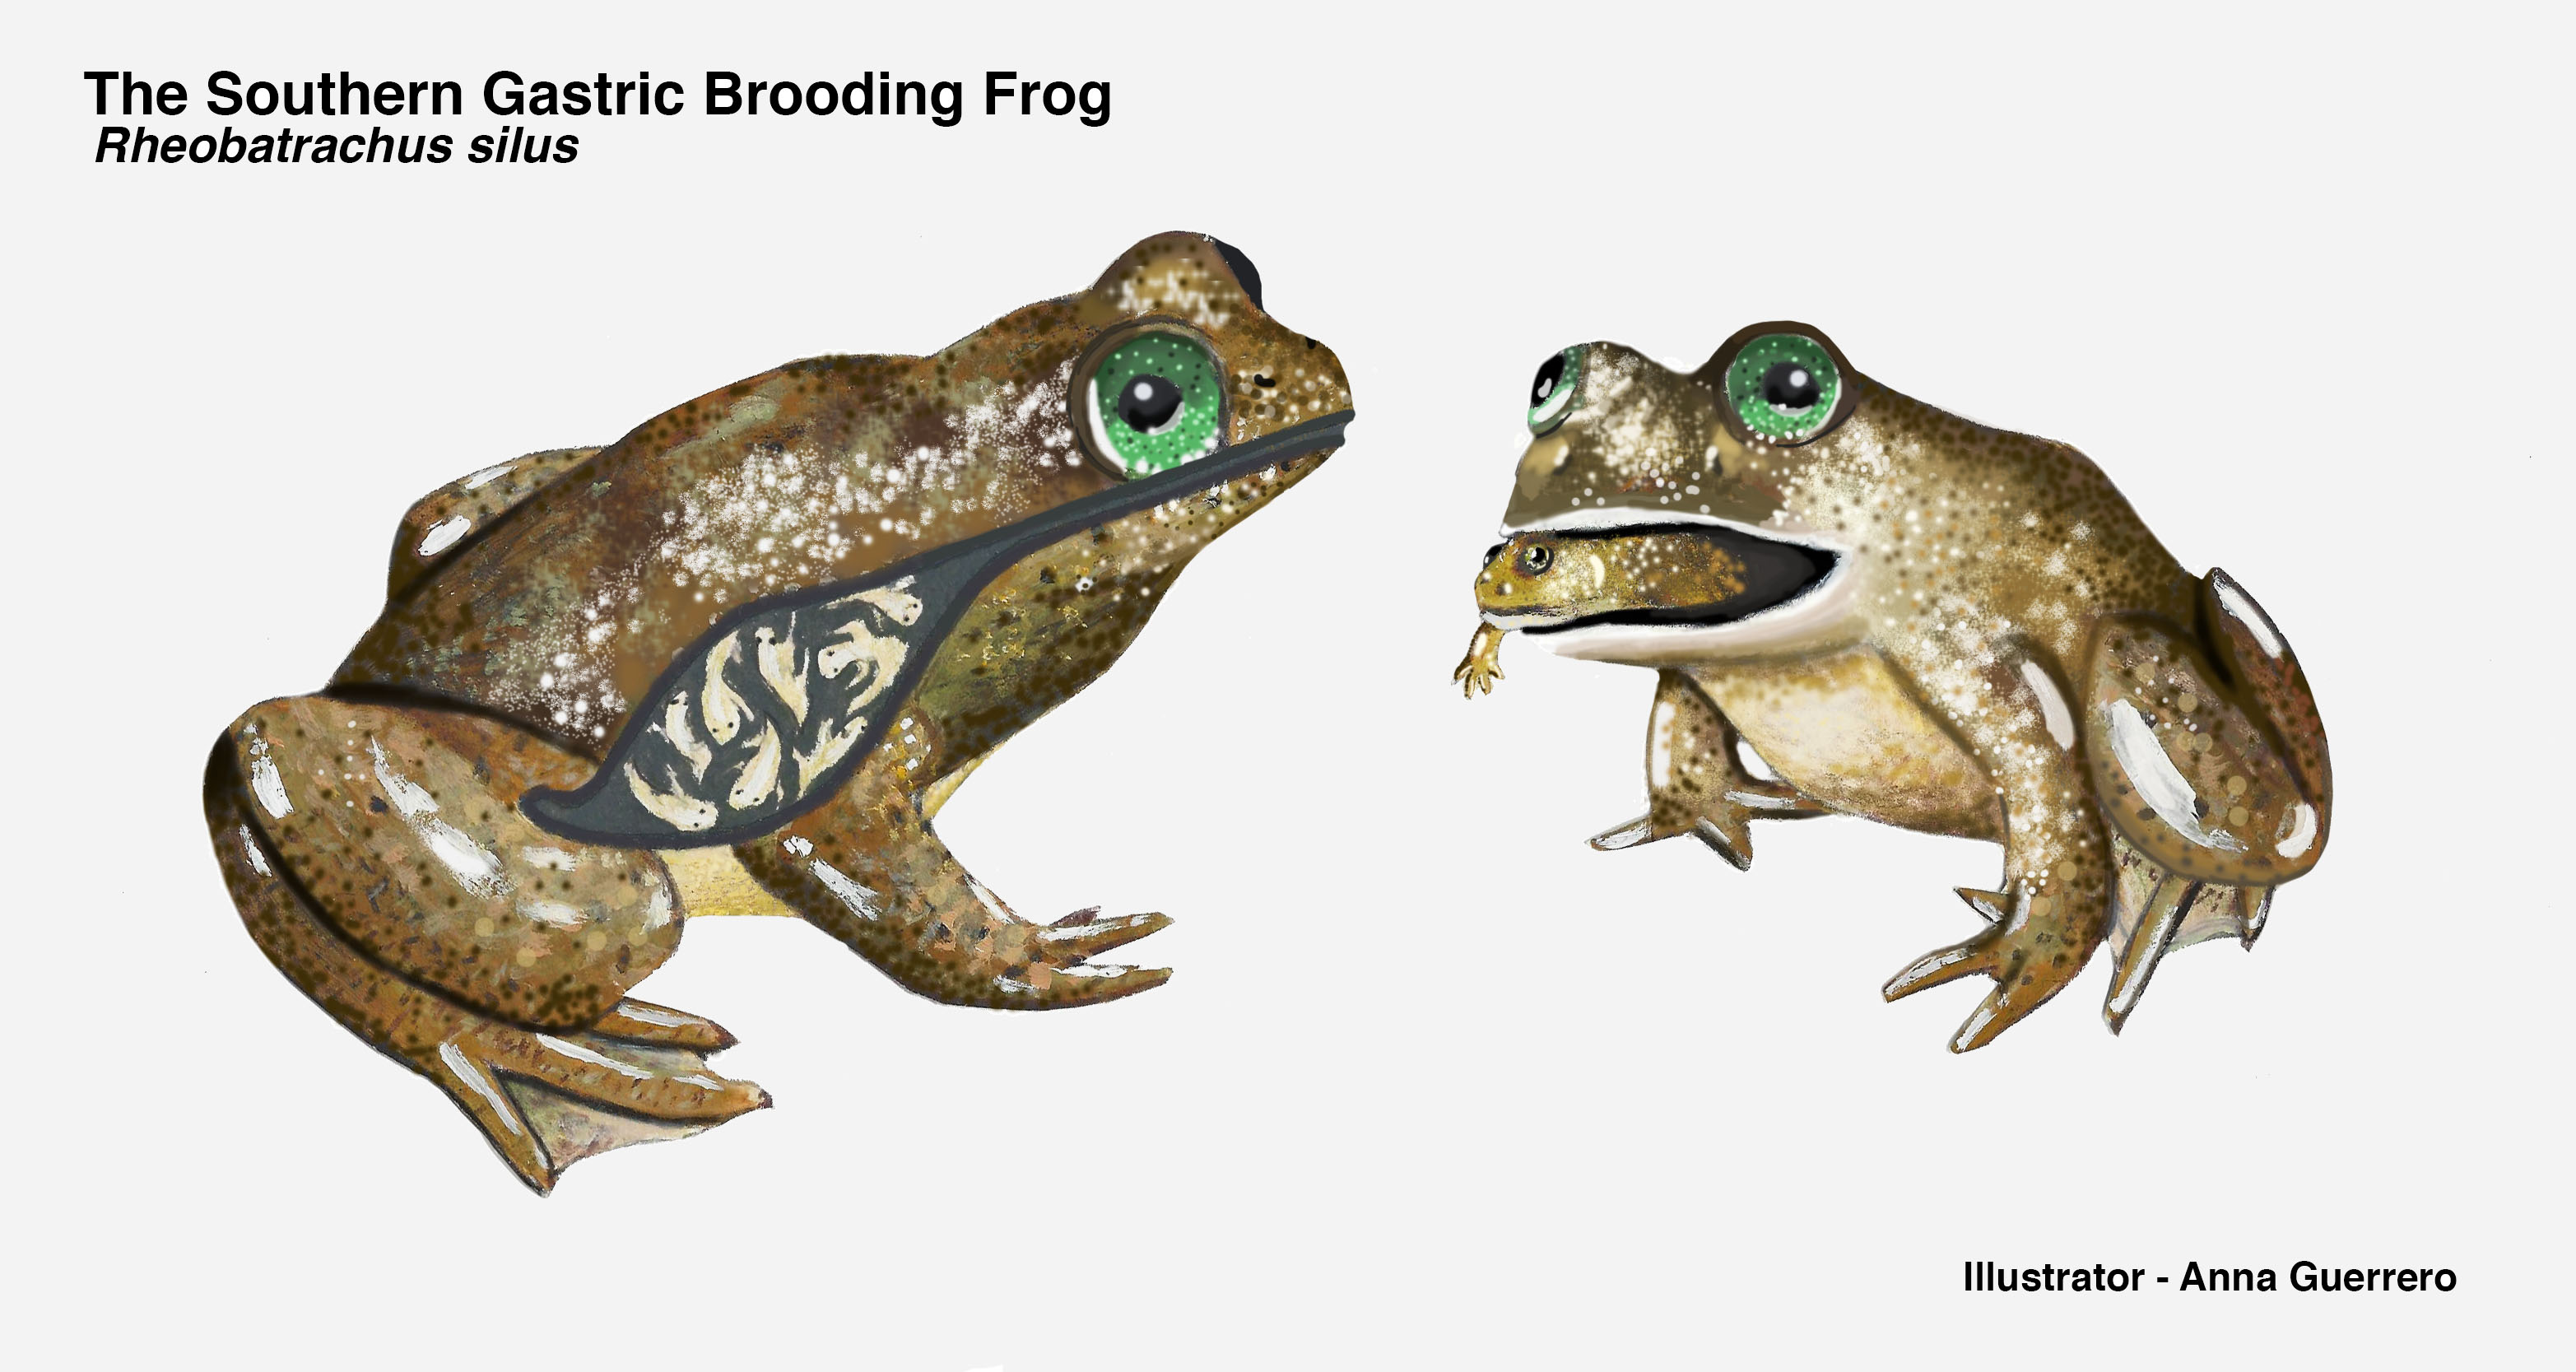 An illustration of the Southern Gastric Brooding Frog